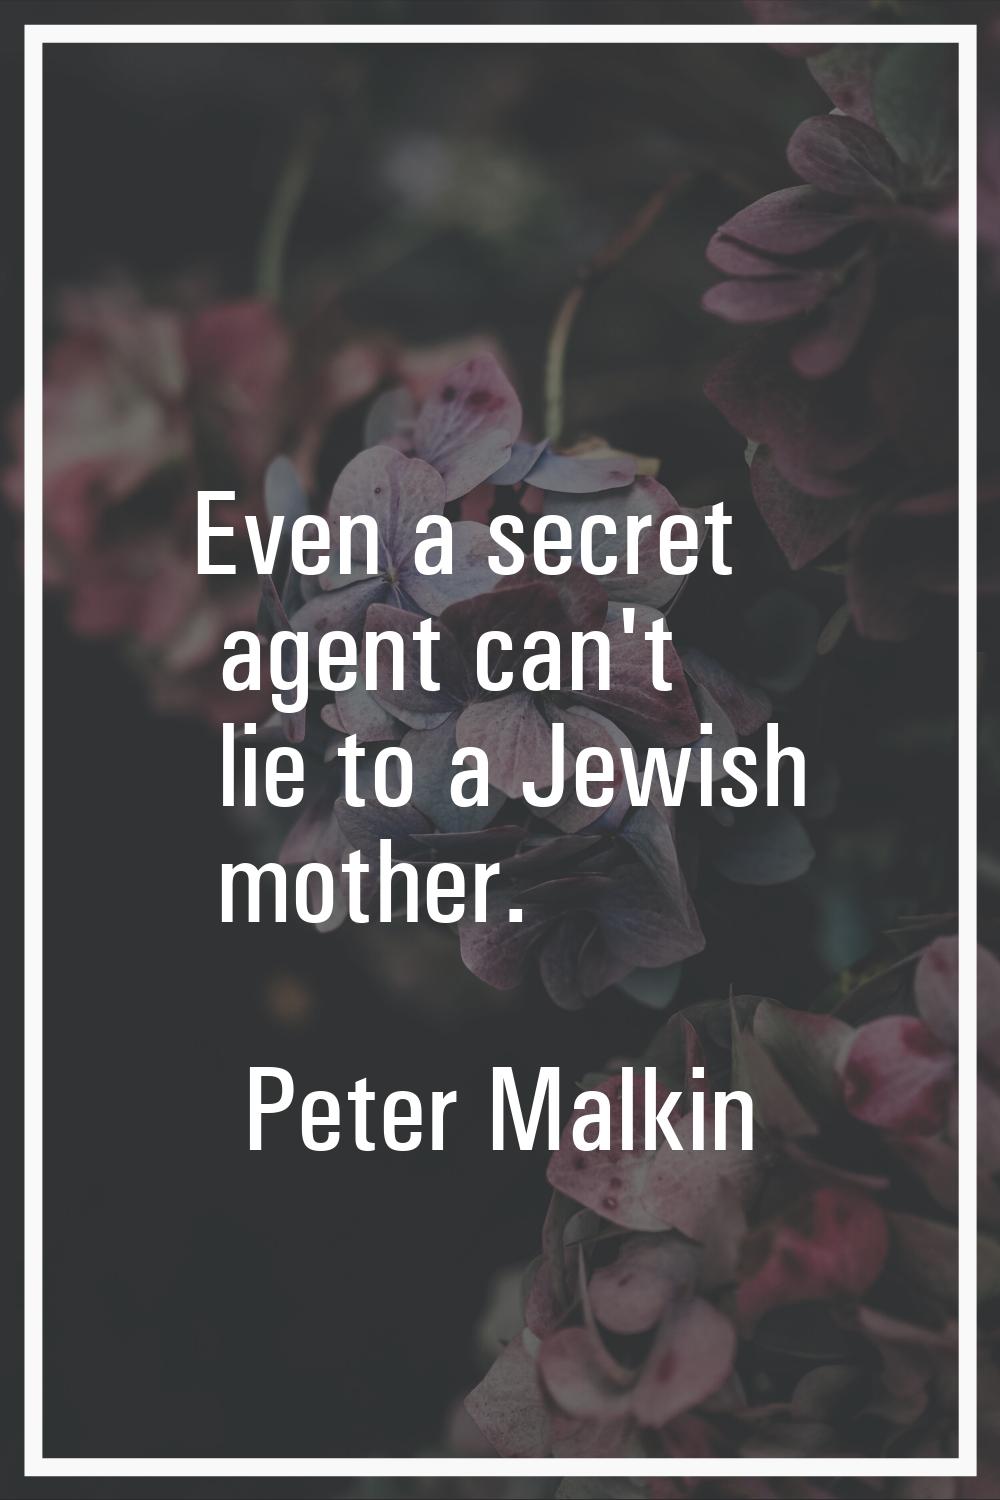 Even a secret agent can't lie to a Jewish mother.